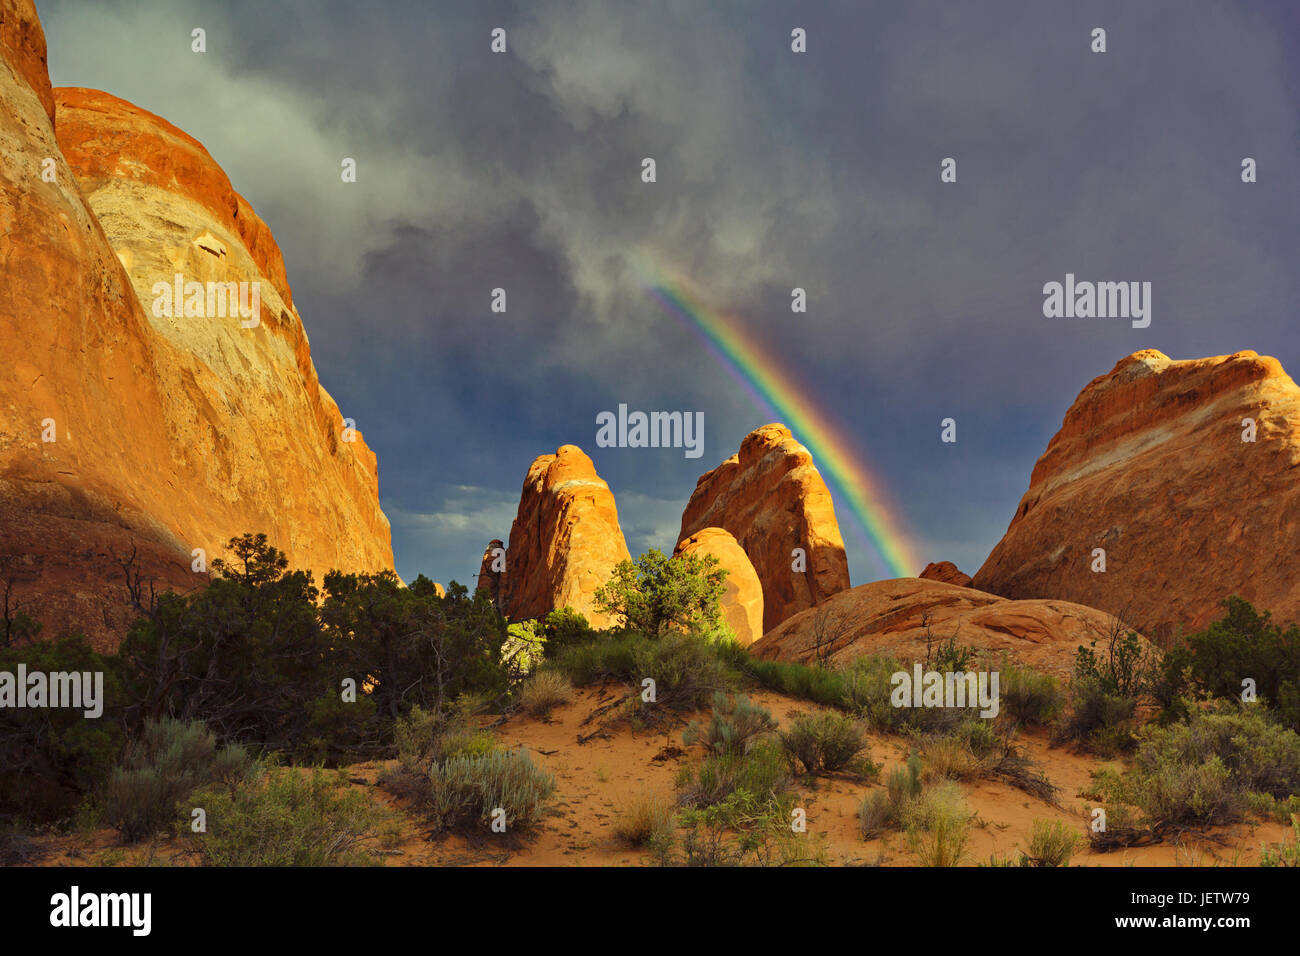 Suggestive image of rainbow bursting from storm clouds as sunlight graces red hues of rocks in Utah. Positive beauty in nature and concepts of hope an Stock Photo